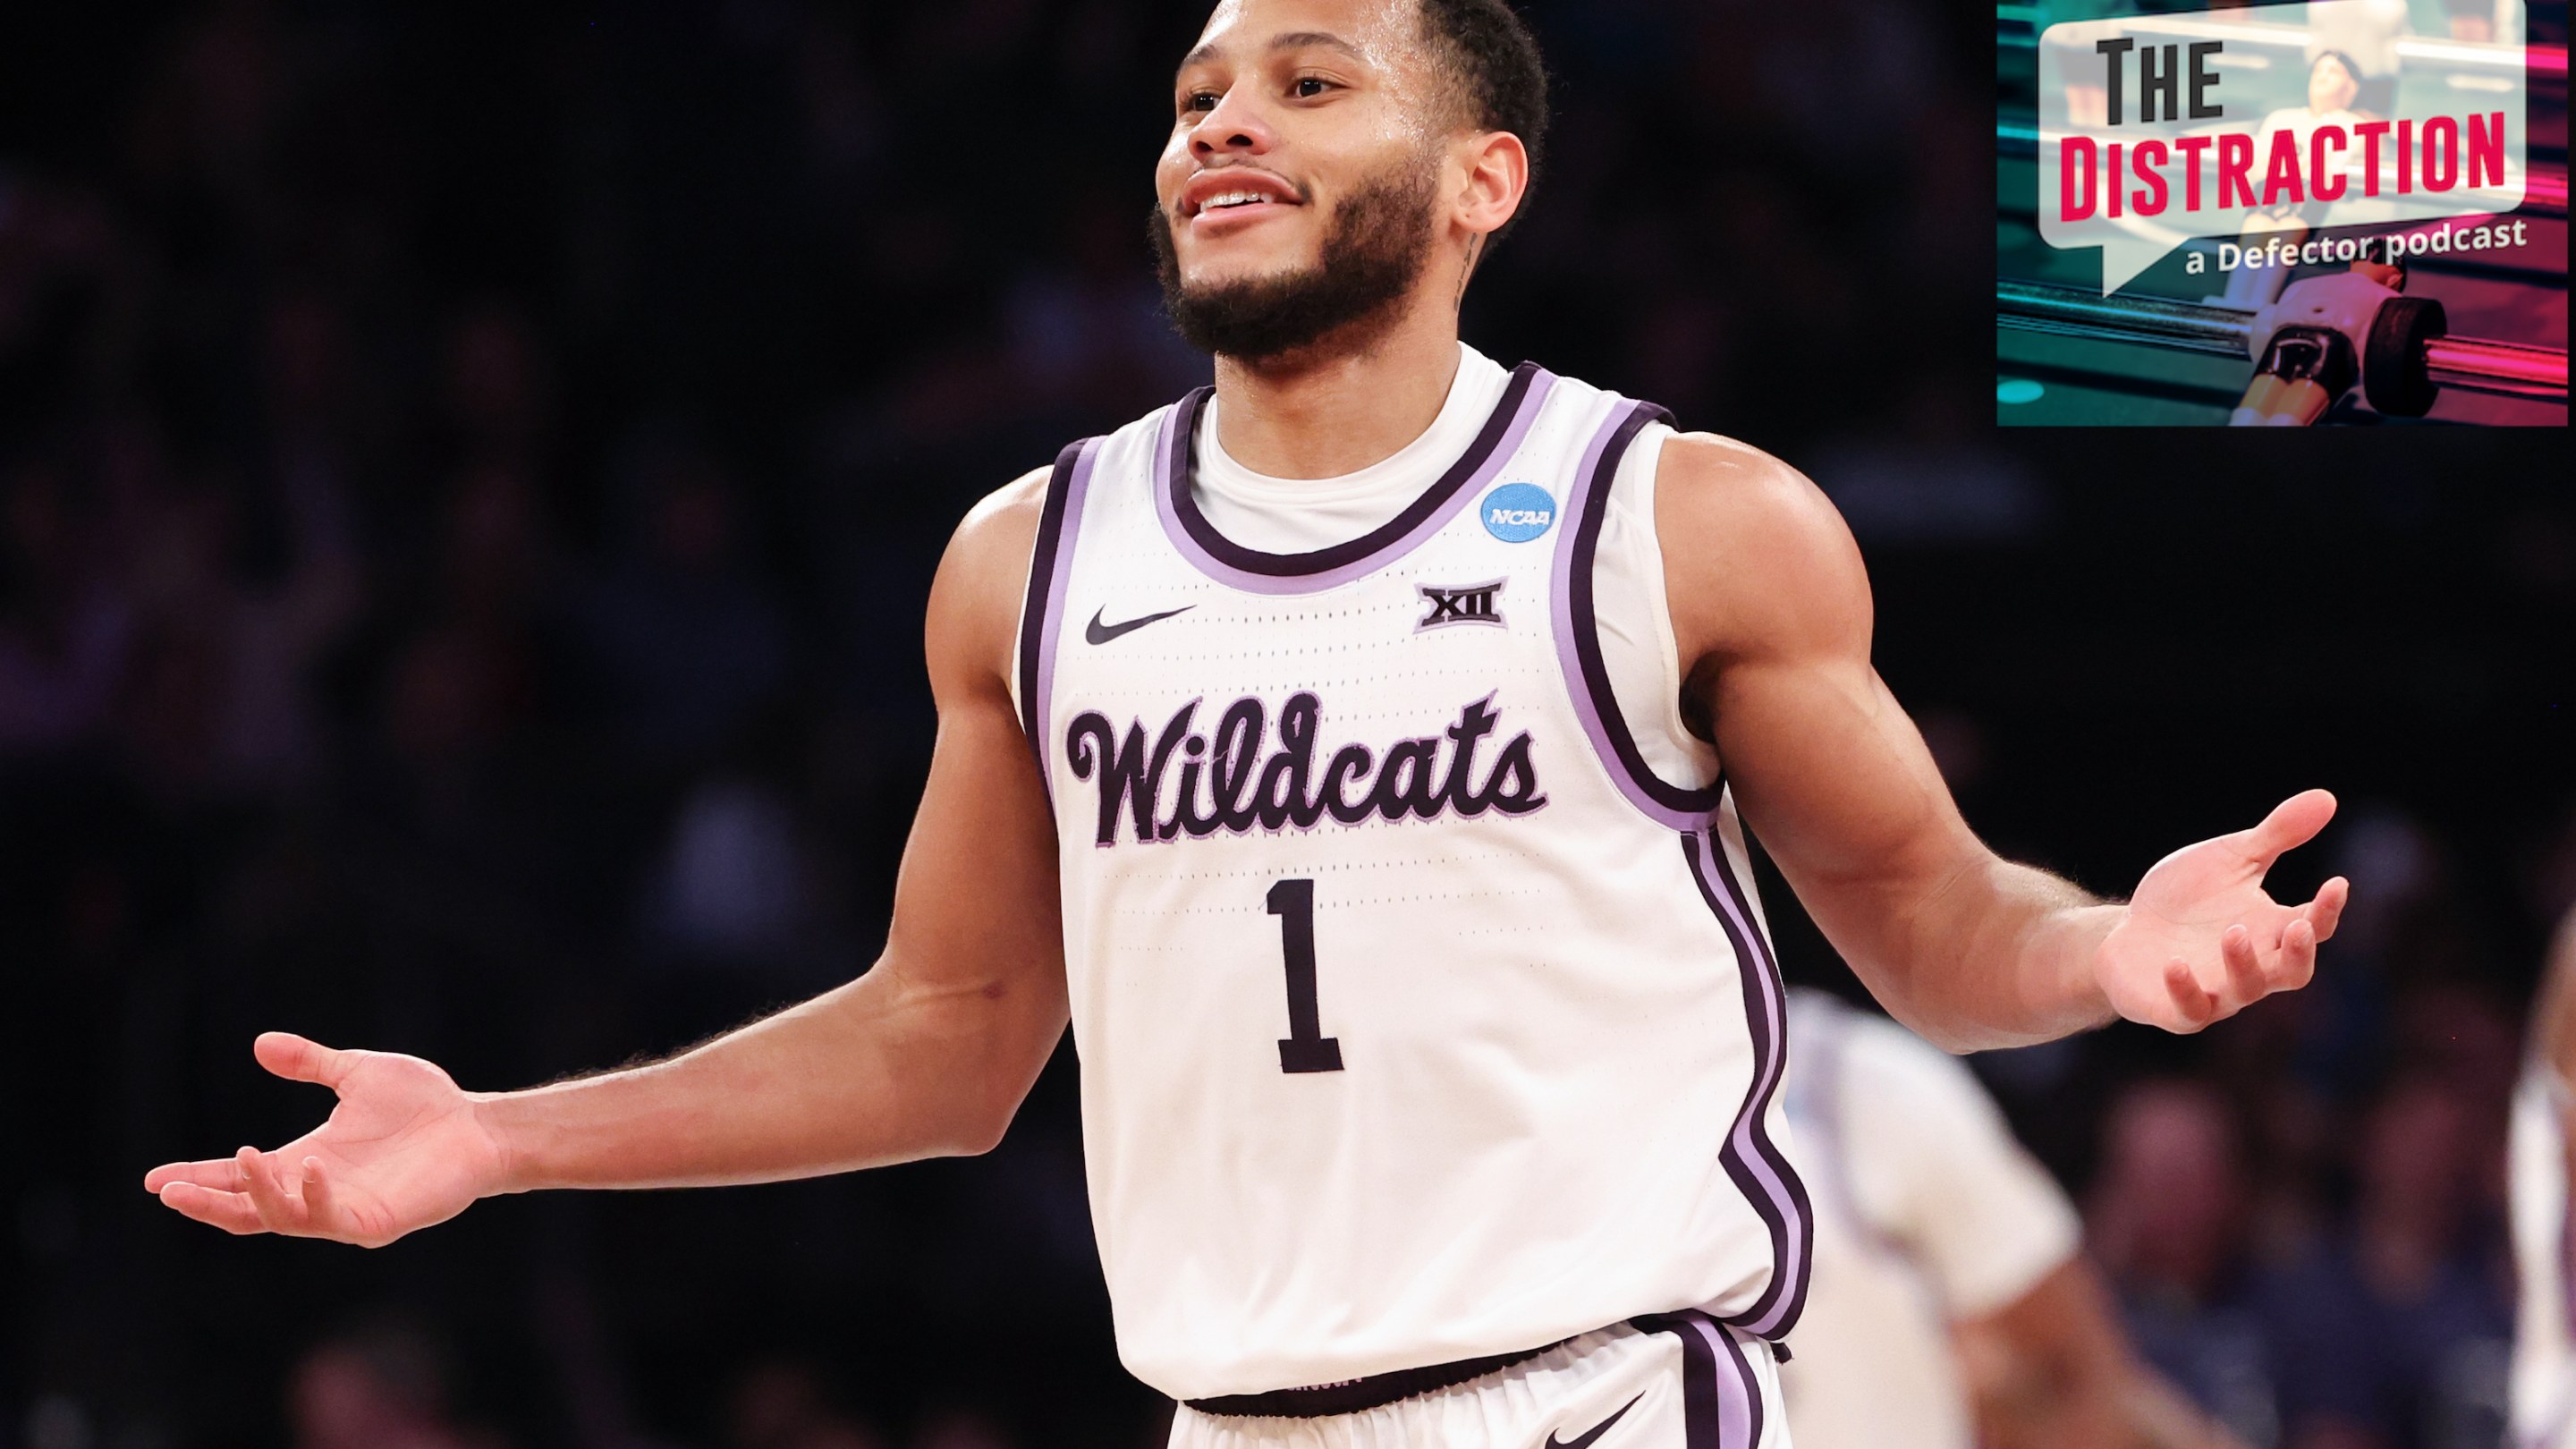 Kansas State guard Markquis Nowell shrugs after hitting a big shot in the Wildcats' Elite Eight game at Madison Square Garden.